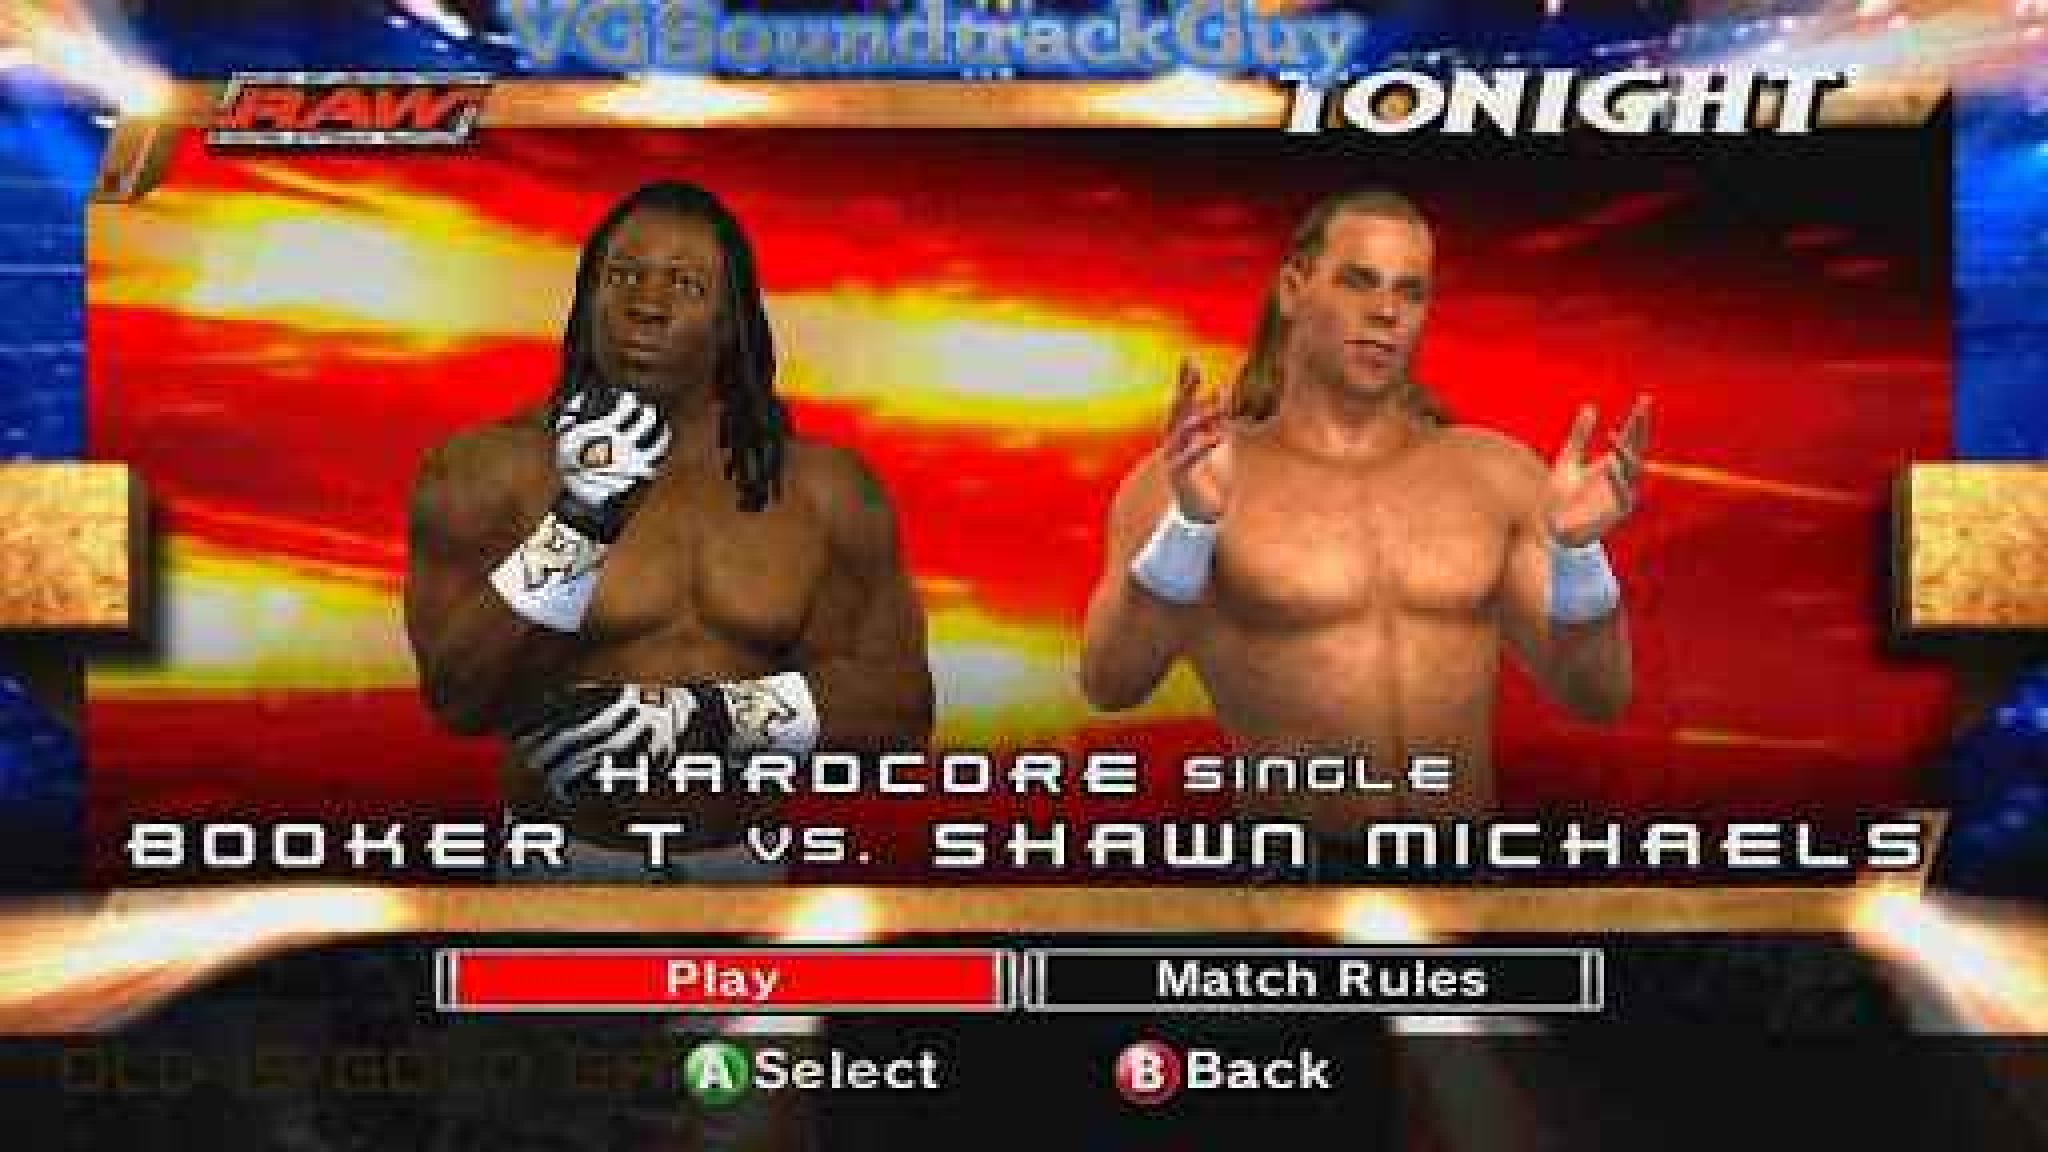 wwe smackdown vs raw 2010 system requirements